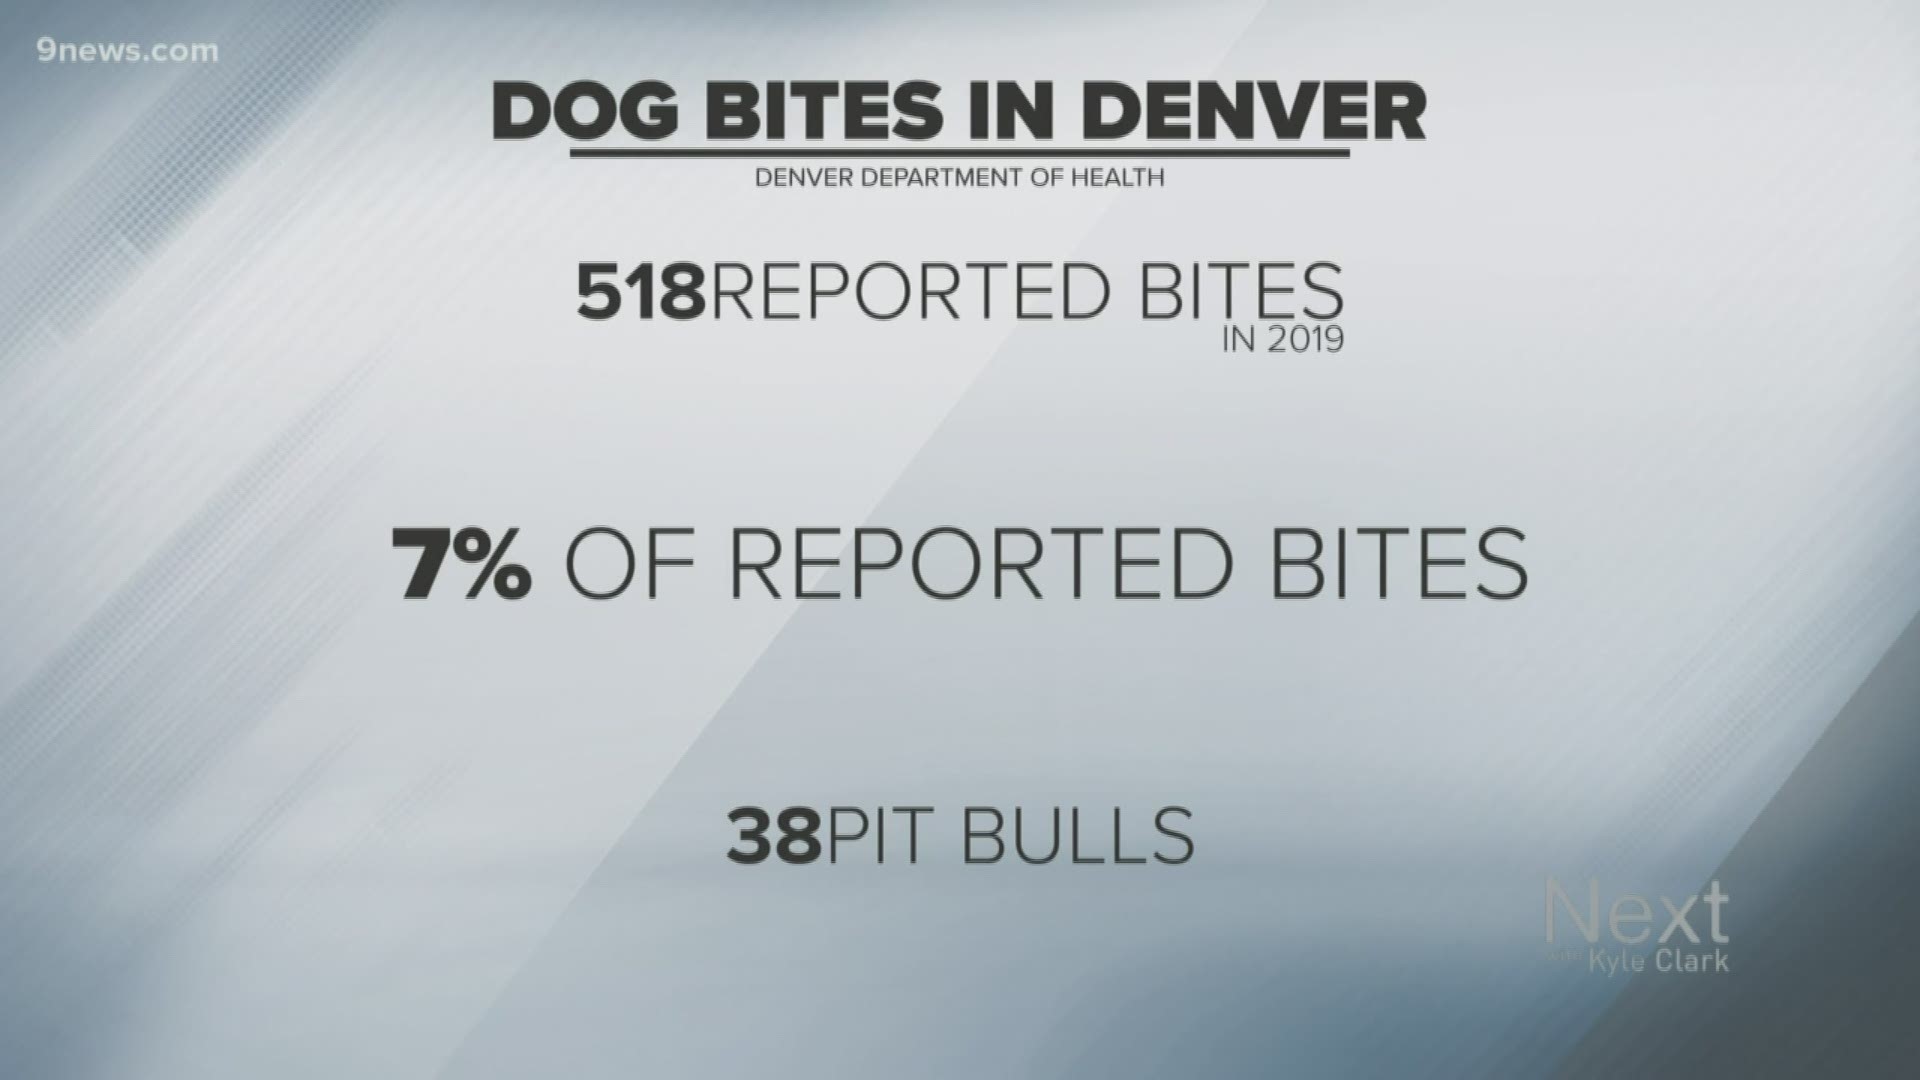 Pit bulls have been top of mind in Denver, as the city's been debating their legalization. Let's look at the hard facts on dog bites from 2019.